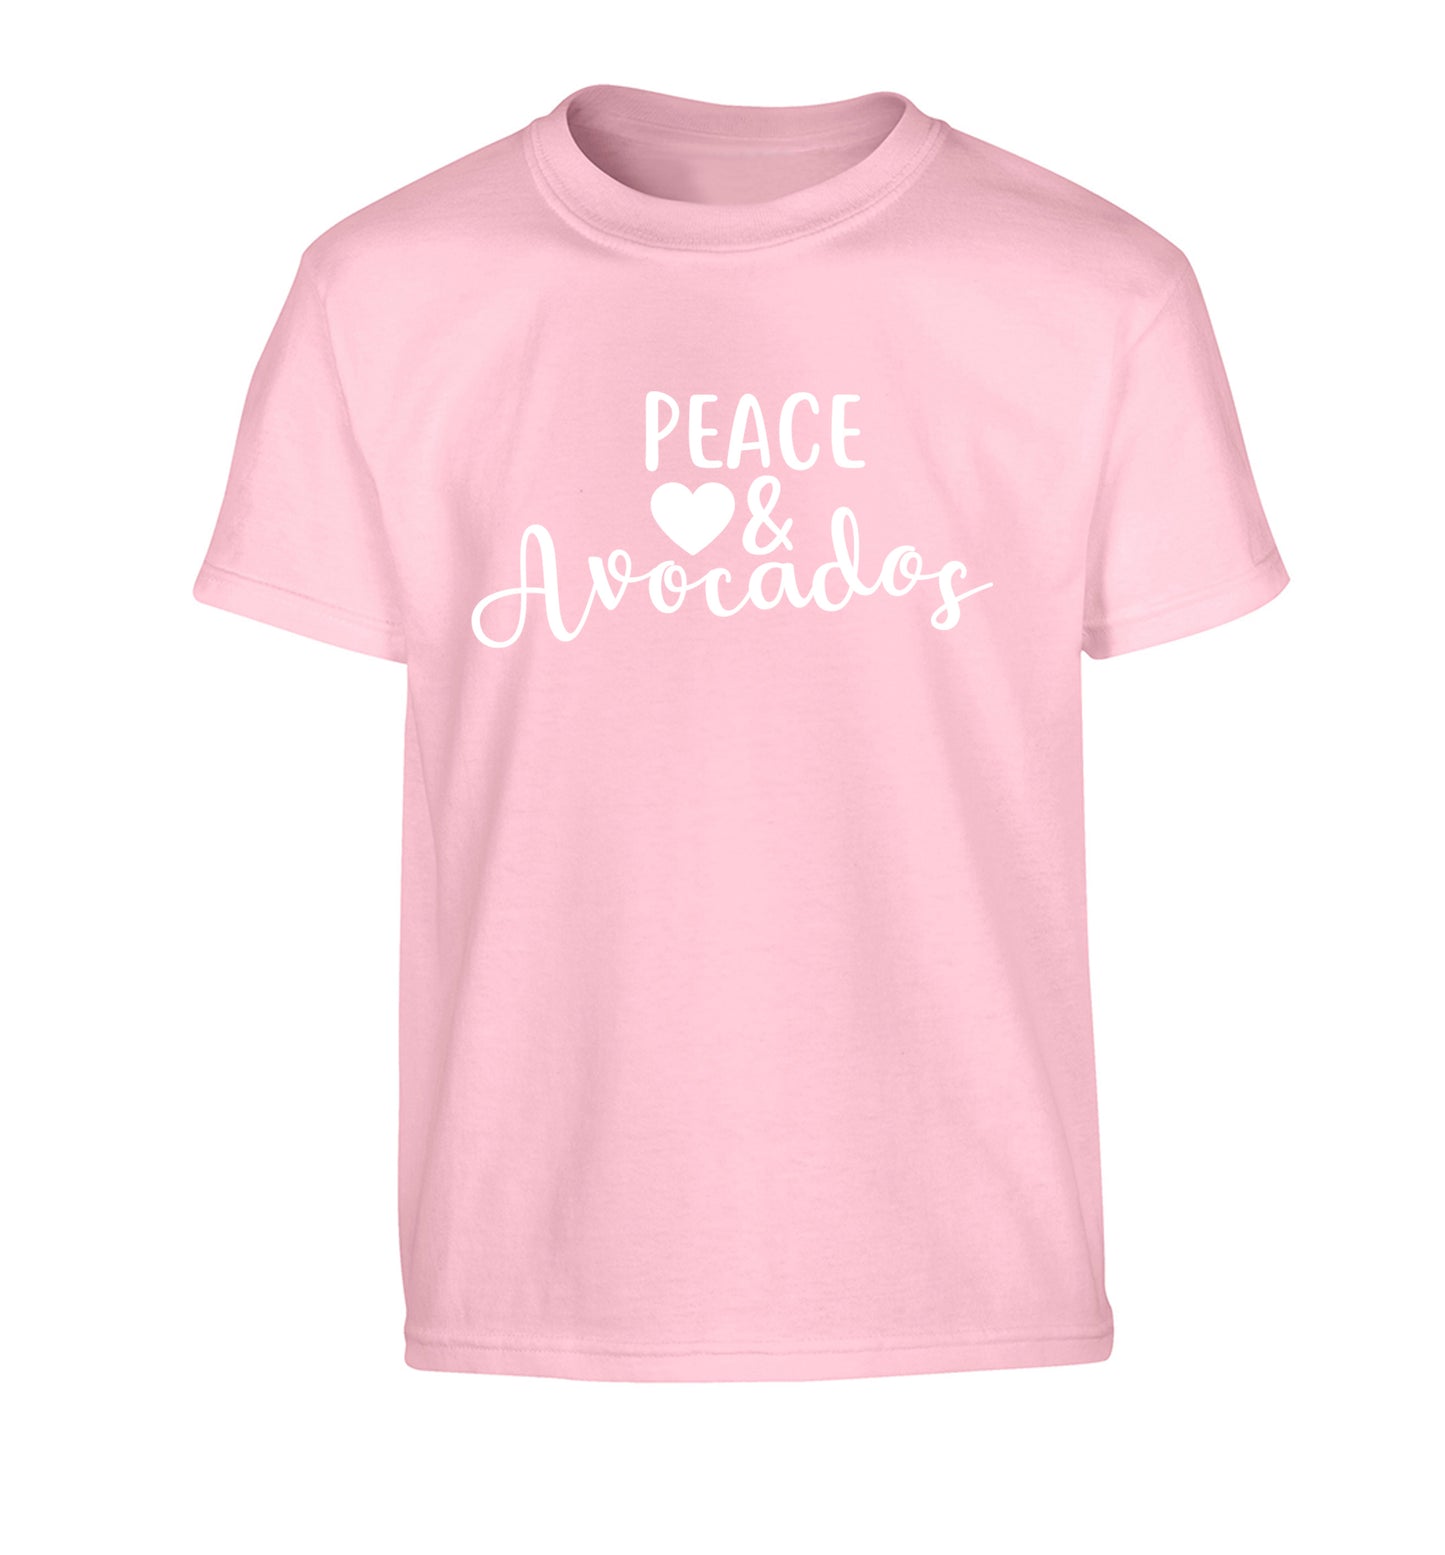 Peace love and avocados Children's light pink Tshirt 12-14 Years